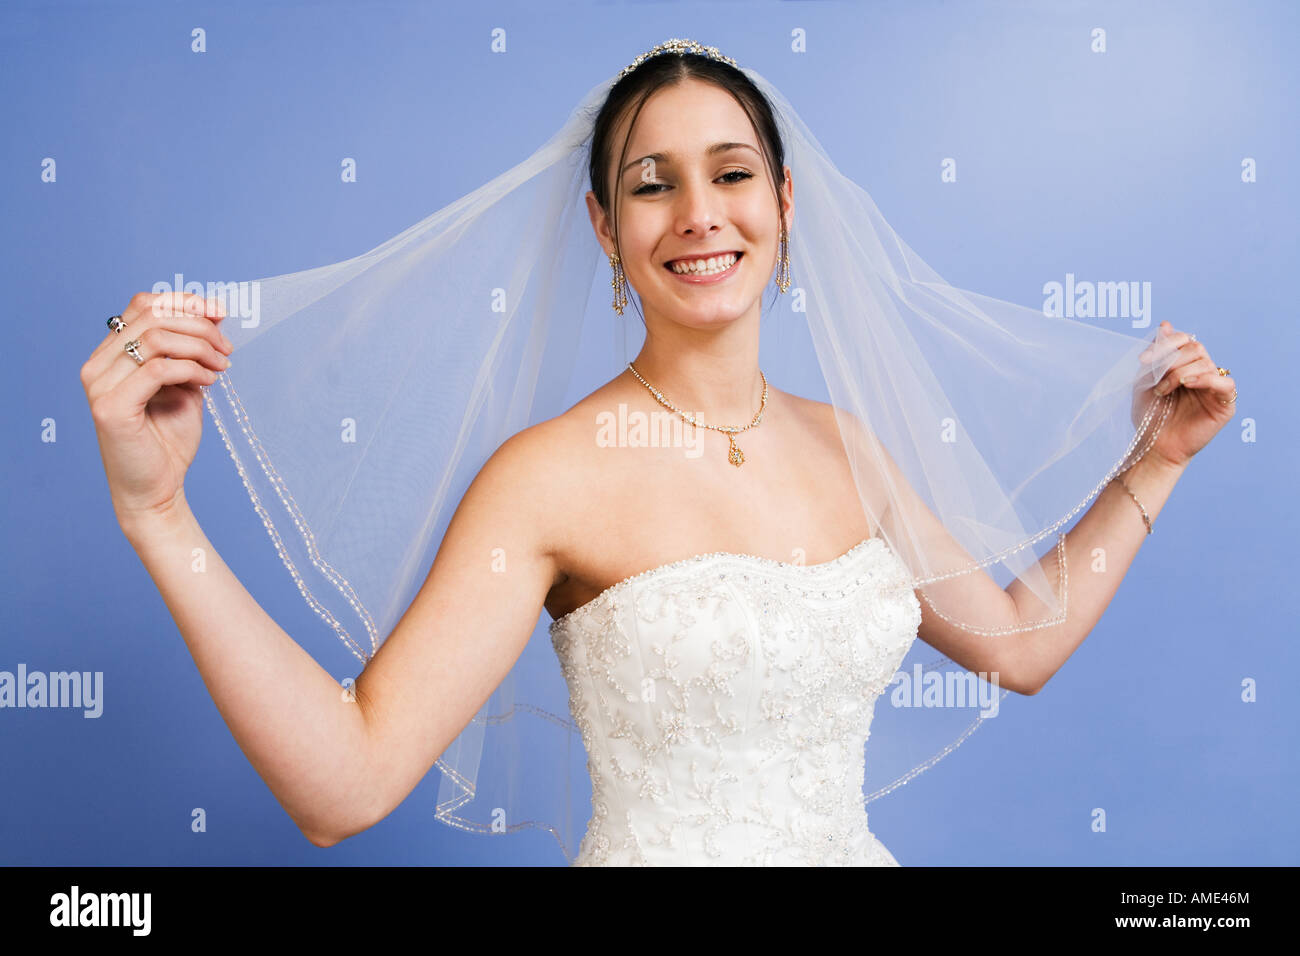 Portrait of young woman wearing wedding gown. Stock Photo